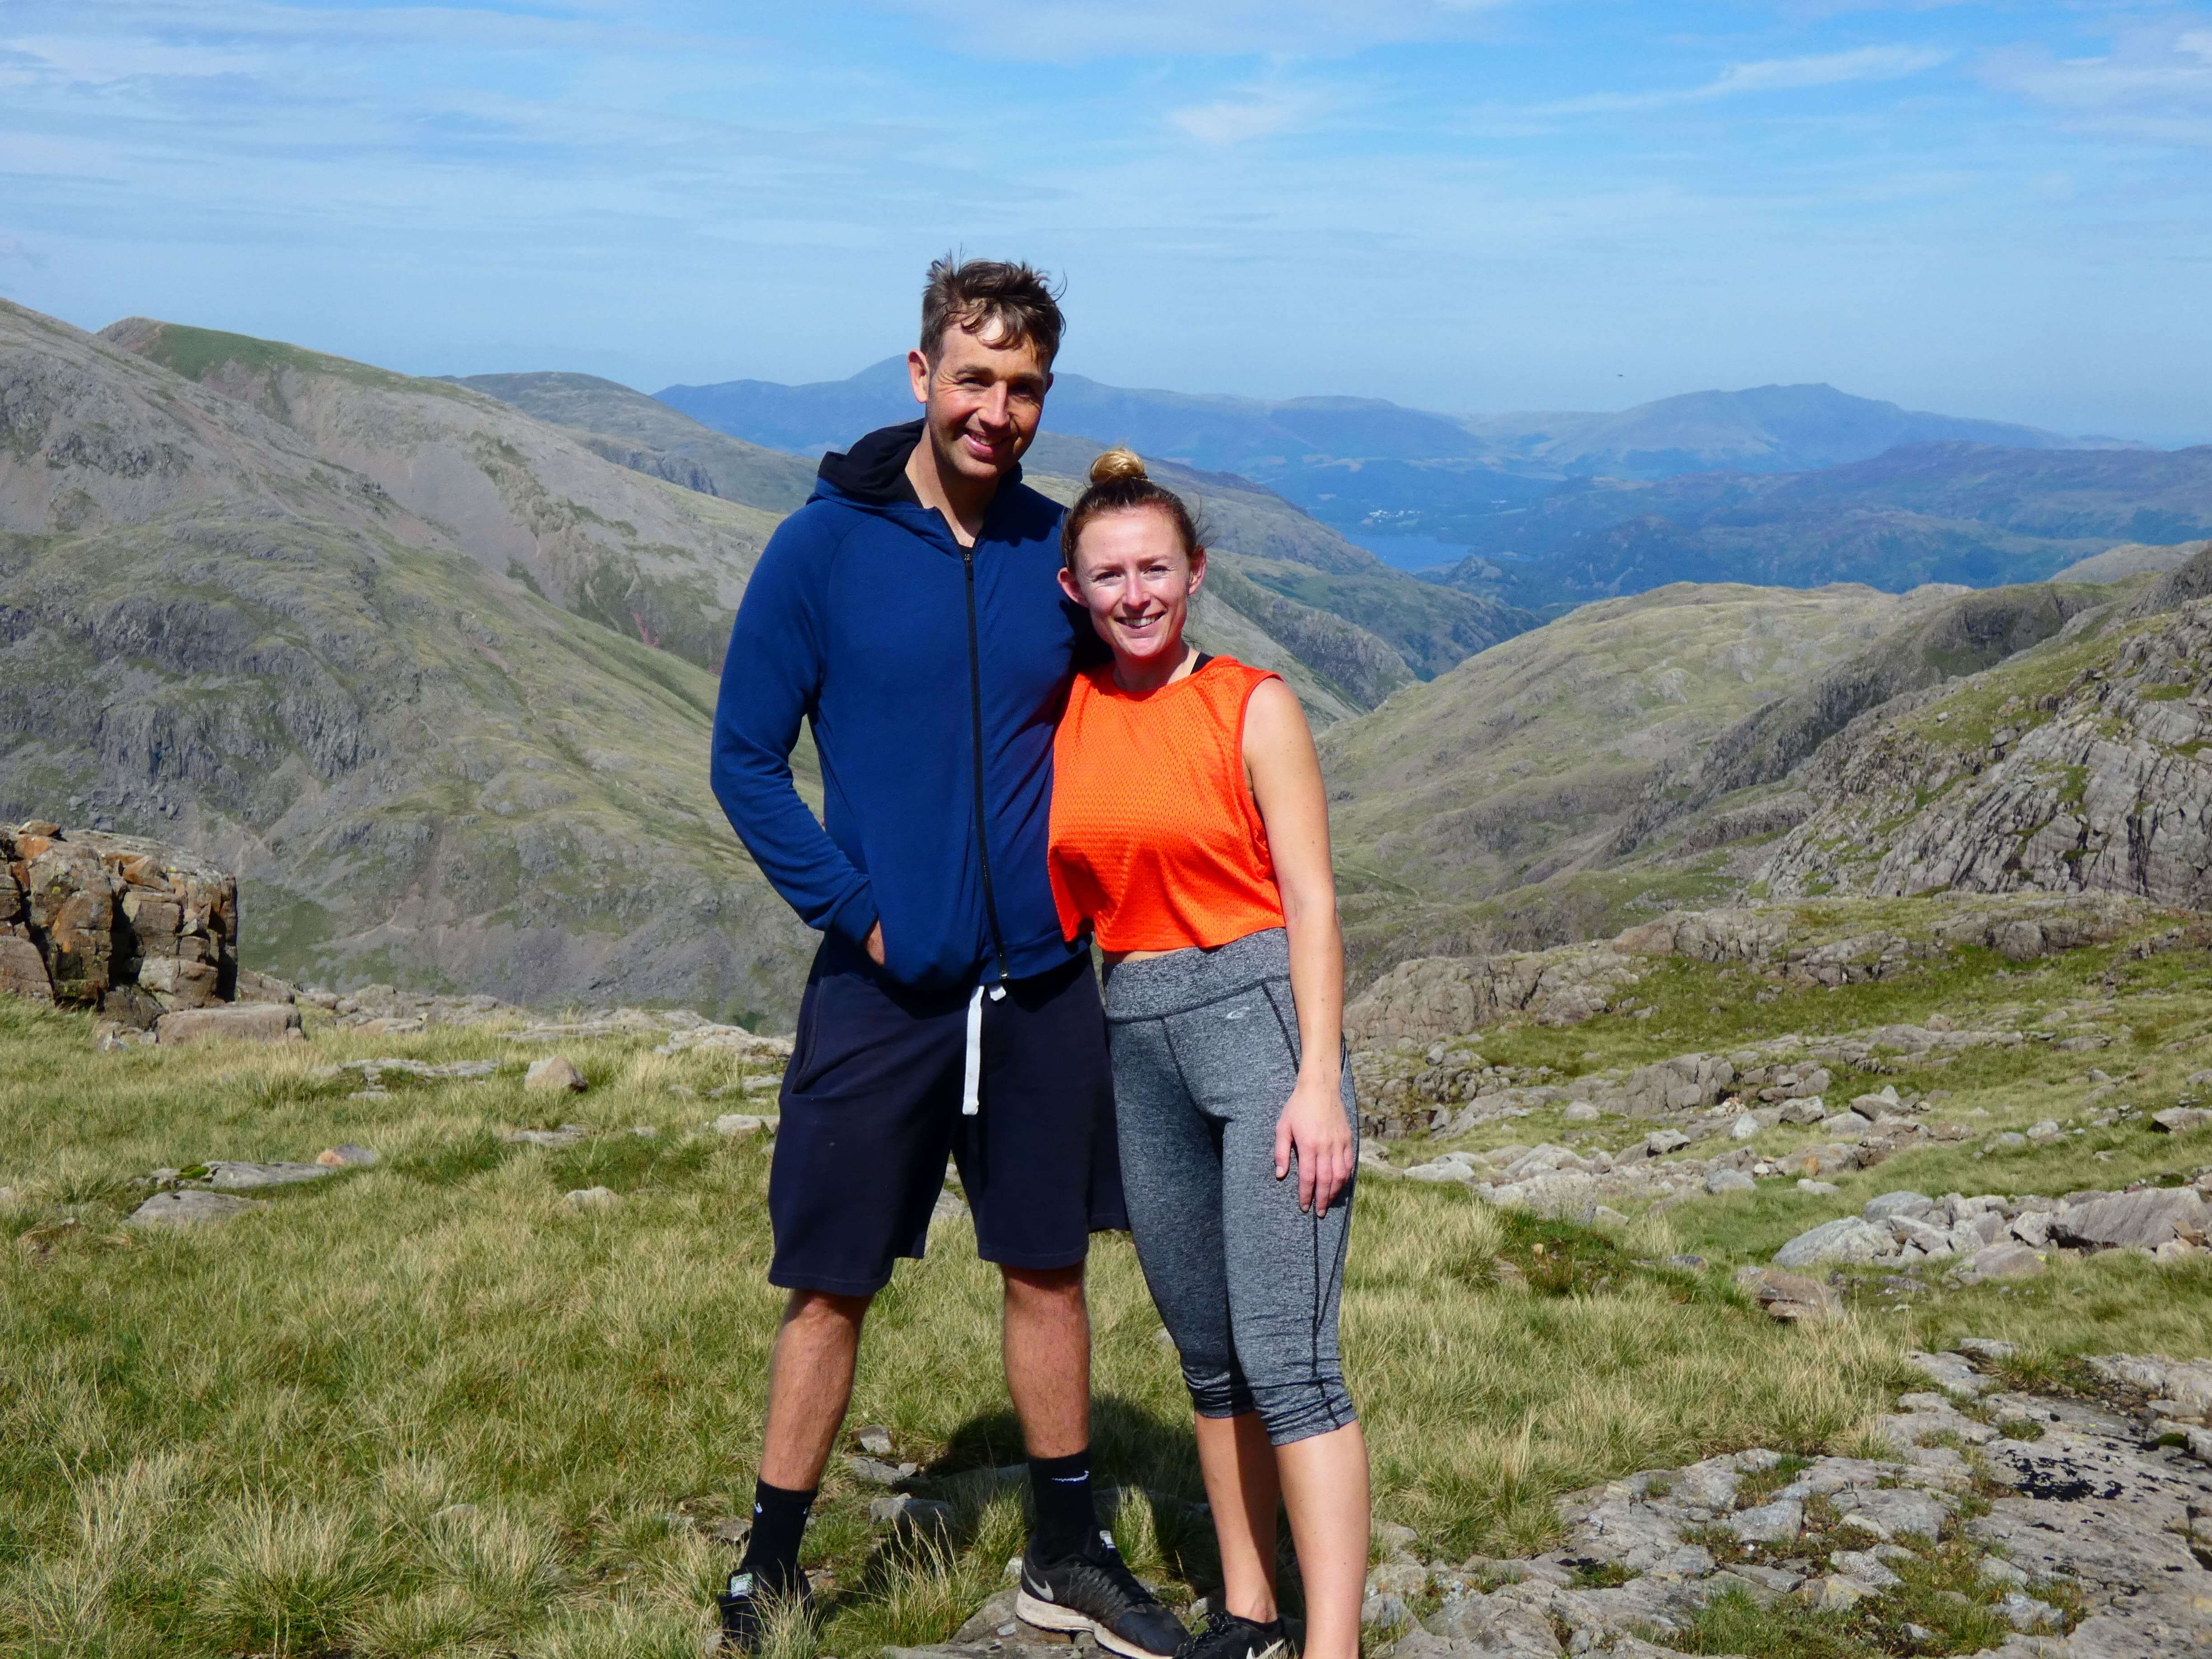 finding the scafell pike mountain